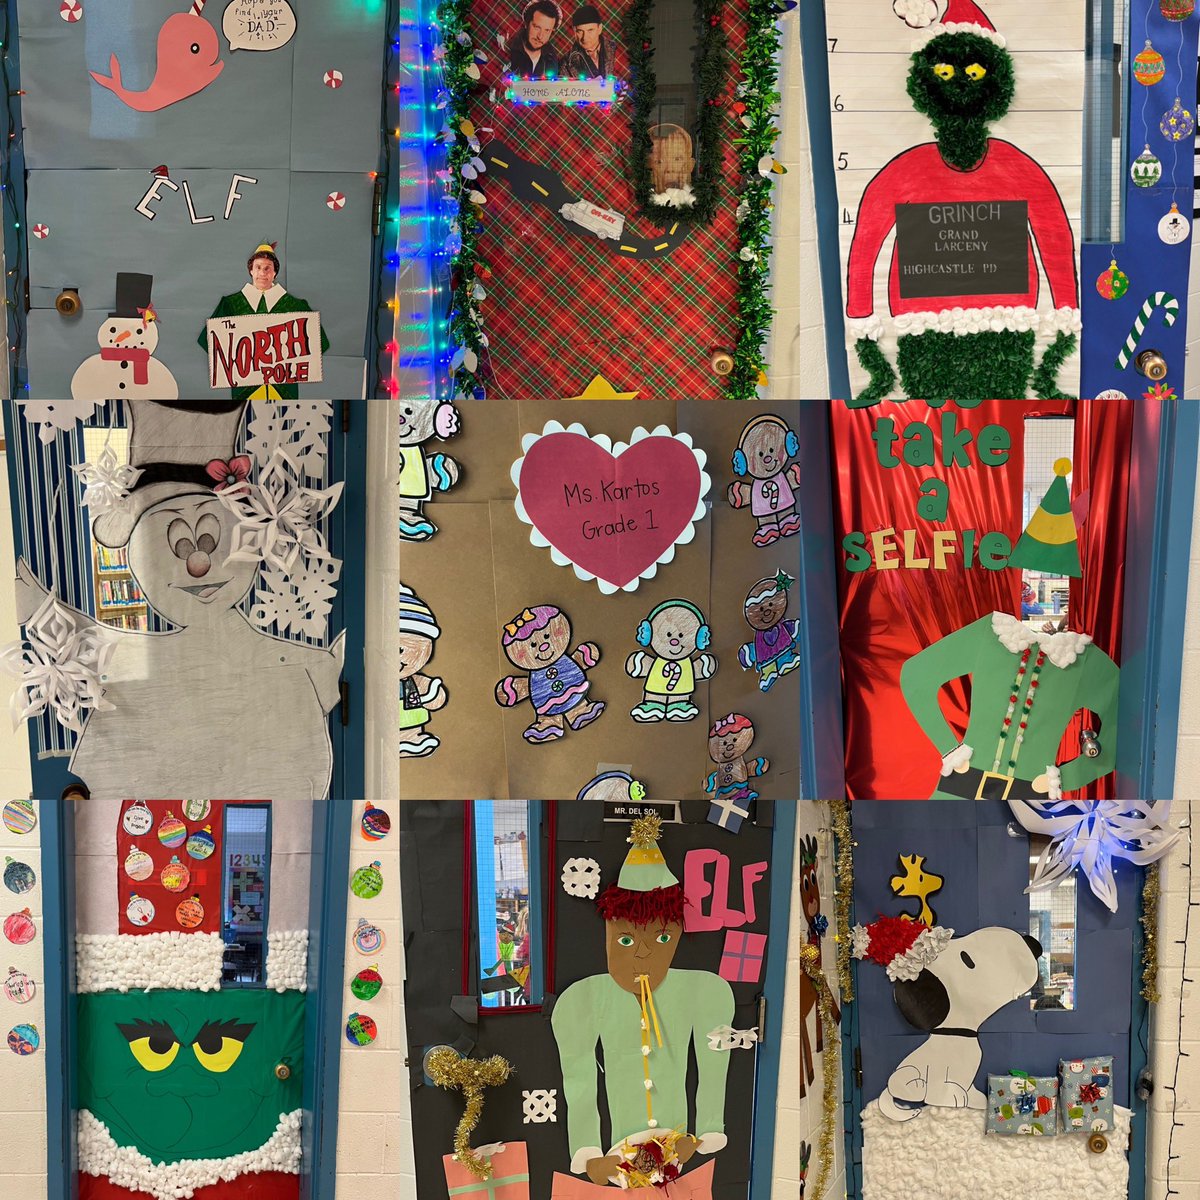 Some impressive doors for our door decorating contest! #holidaymovies @LC3_TDSB @tdsb @TDSB_Arts